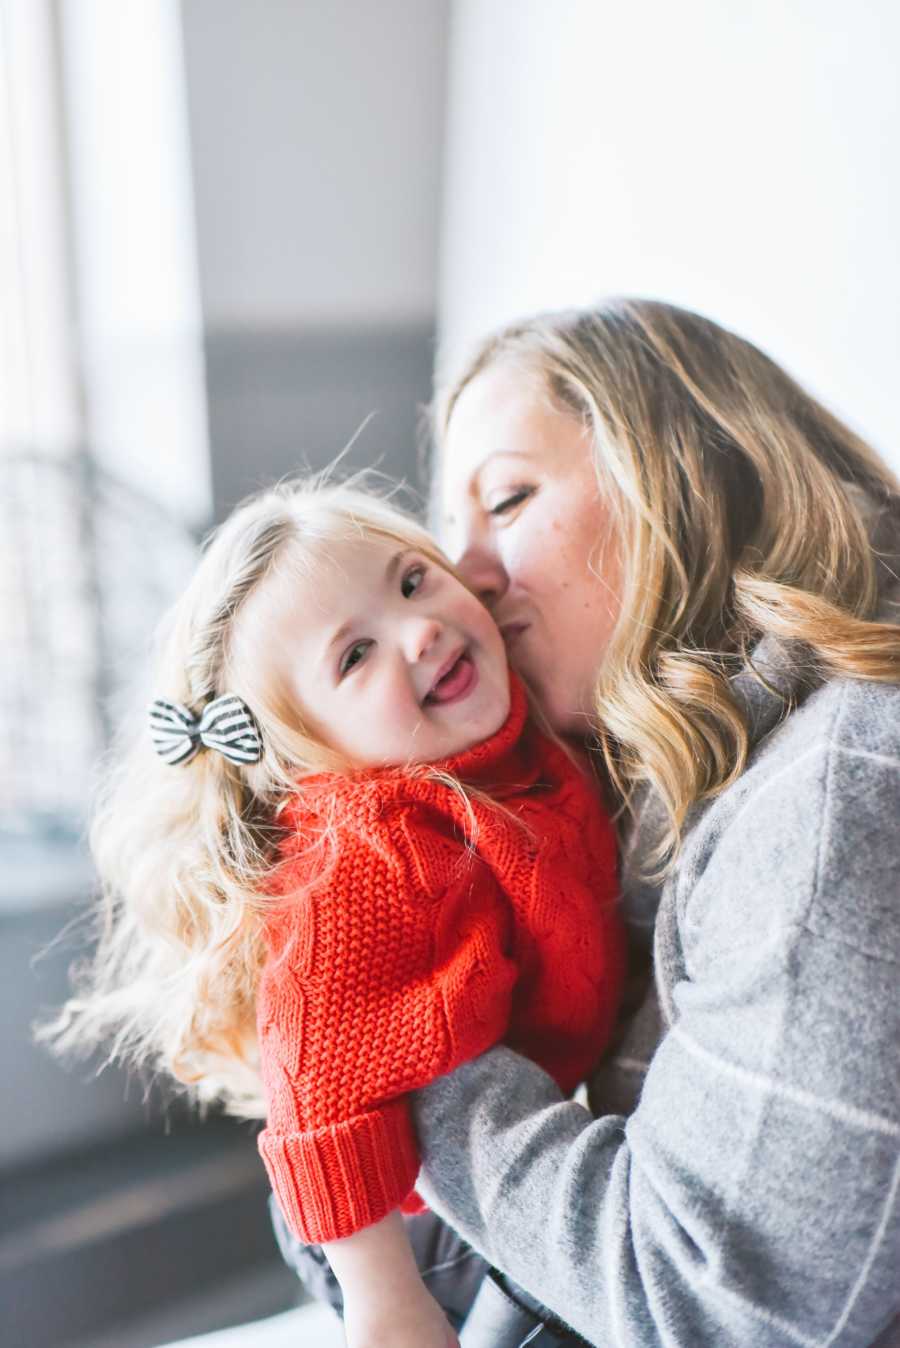 Little girl with down syndrome smiles as her mother holds her and kisses her on cheek